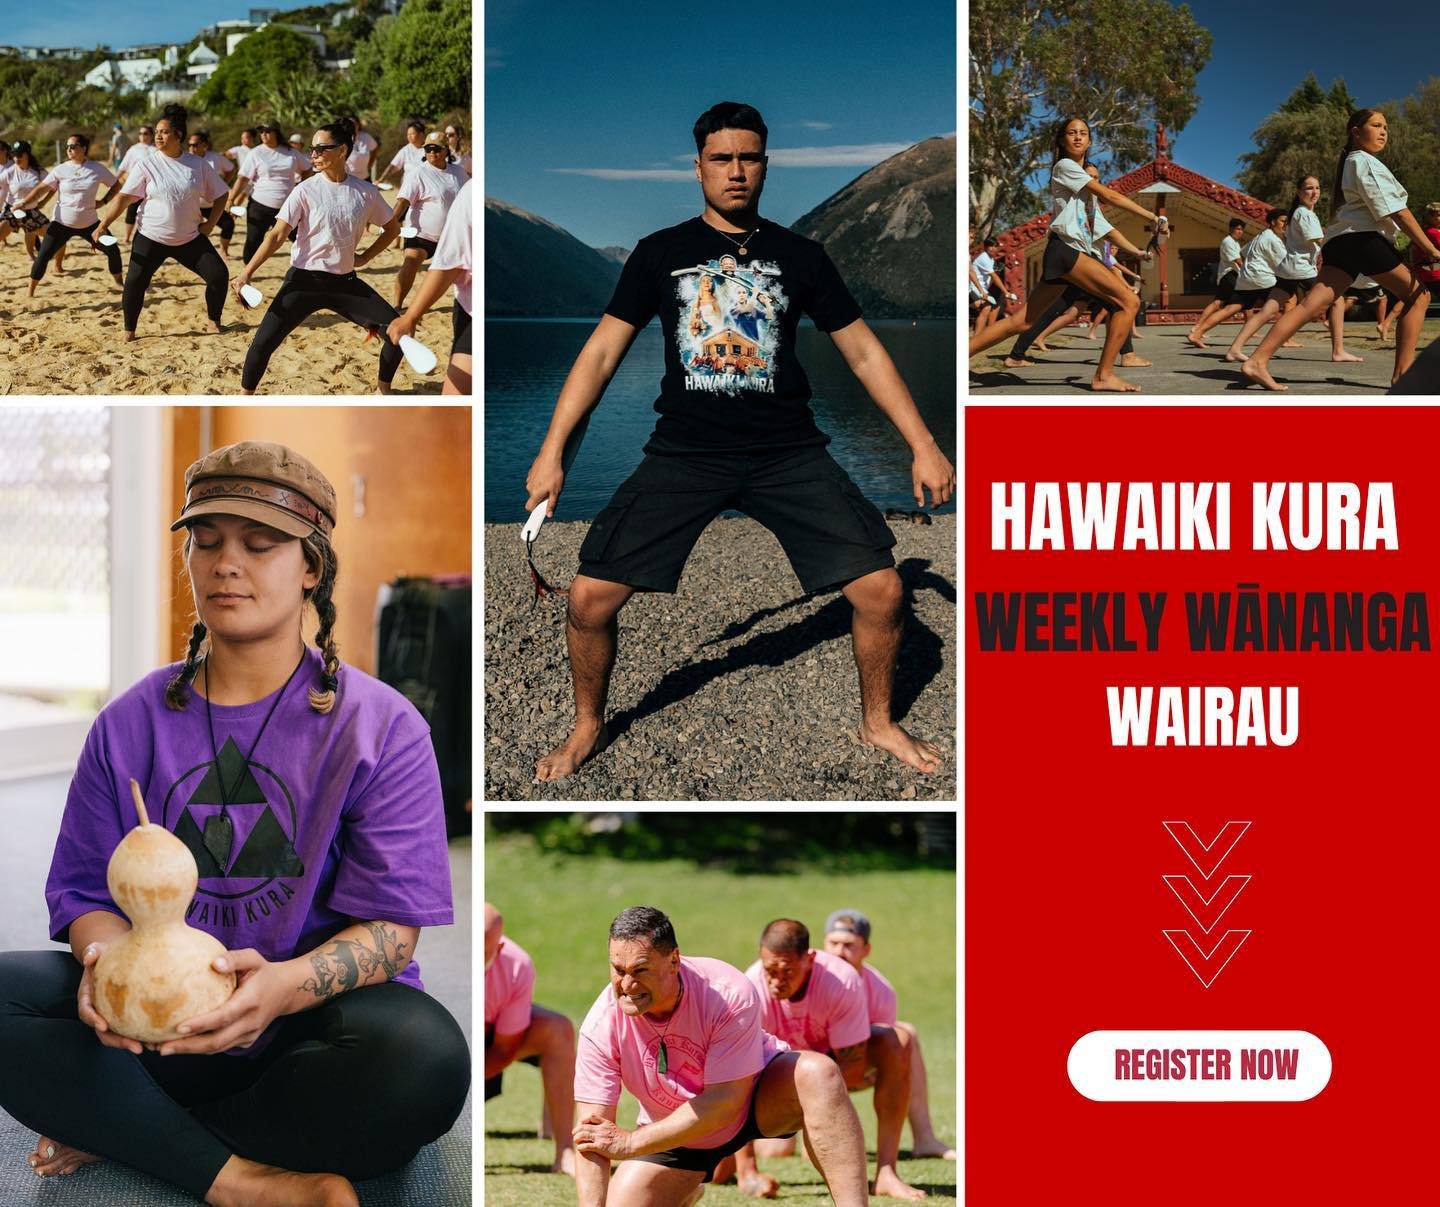 🔥 Kia ora mai e te iwi, You asked, and we&rsquo;re delivering! Join us for our new weekly Hawaiki Kura wānanga right here in Wairau! 🔥

🗓 Starting 5:30 pm Monday, May 13th, we&rsquo;re launching an 8-week pilot program open to everyone aged 12 and